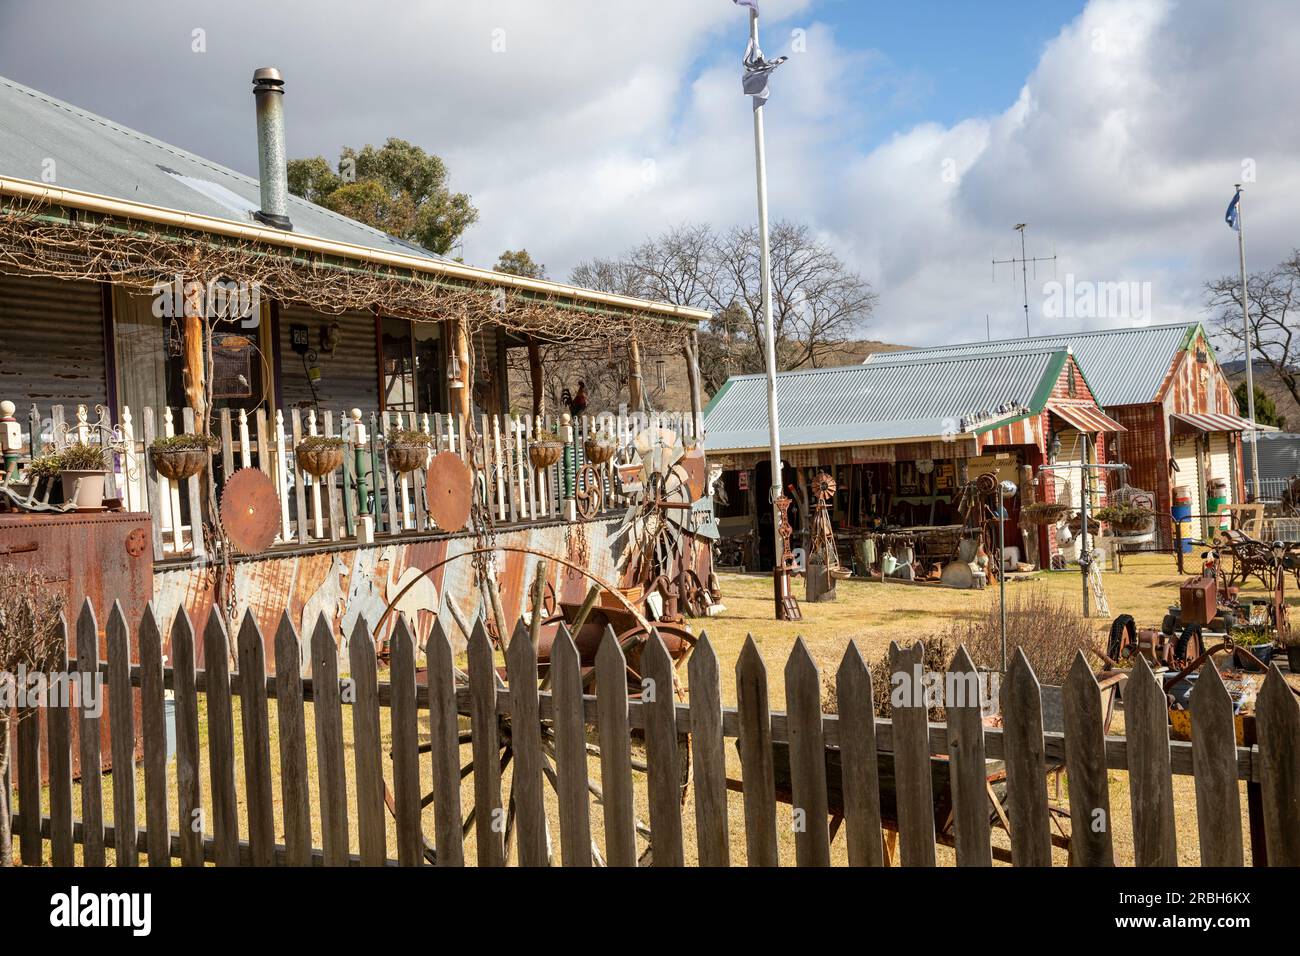 Sofala former gold mining town and village house with rusty metalwork and collectables, New South Wales,Australia Stock Photo